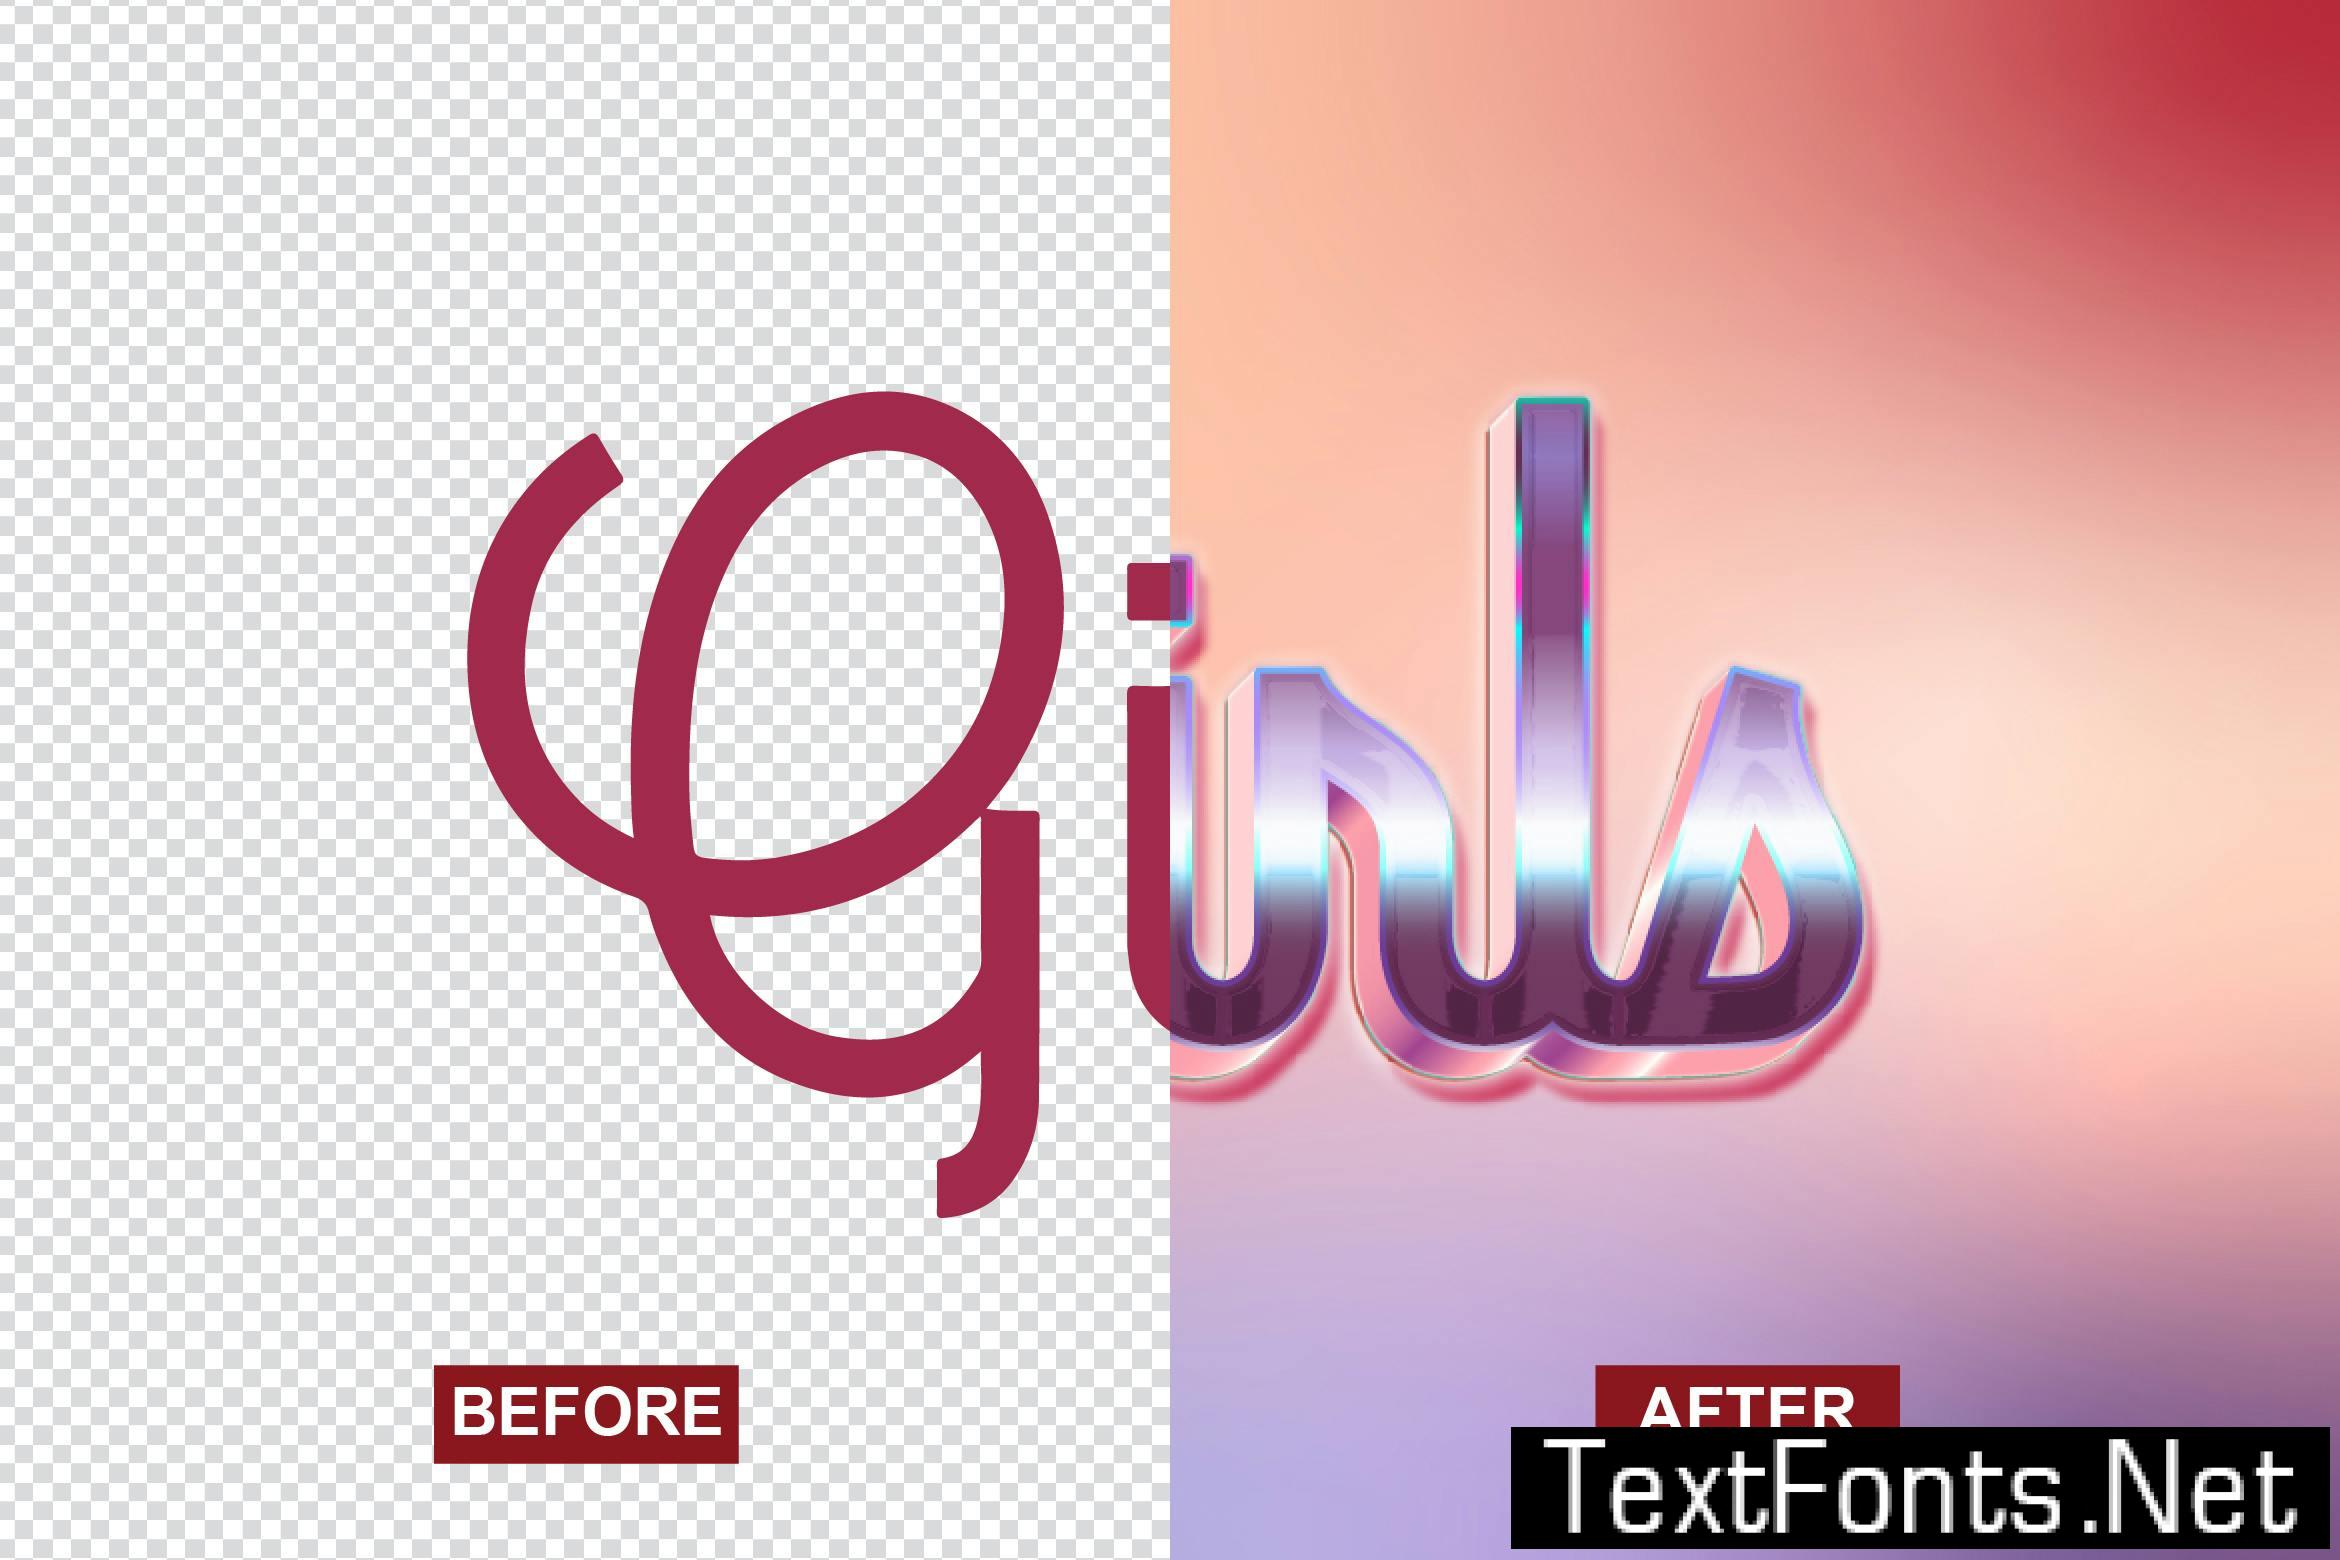 3d text layer style photoshop